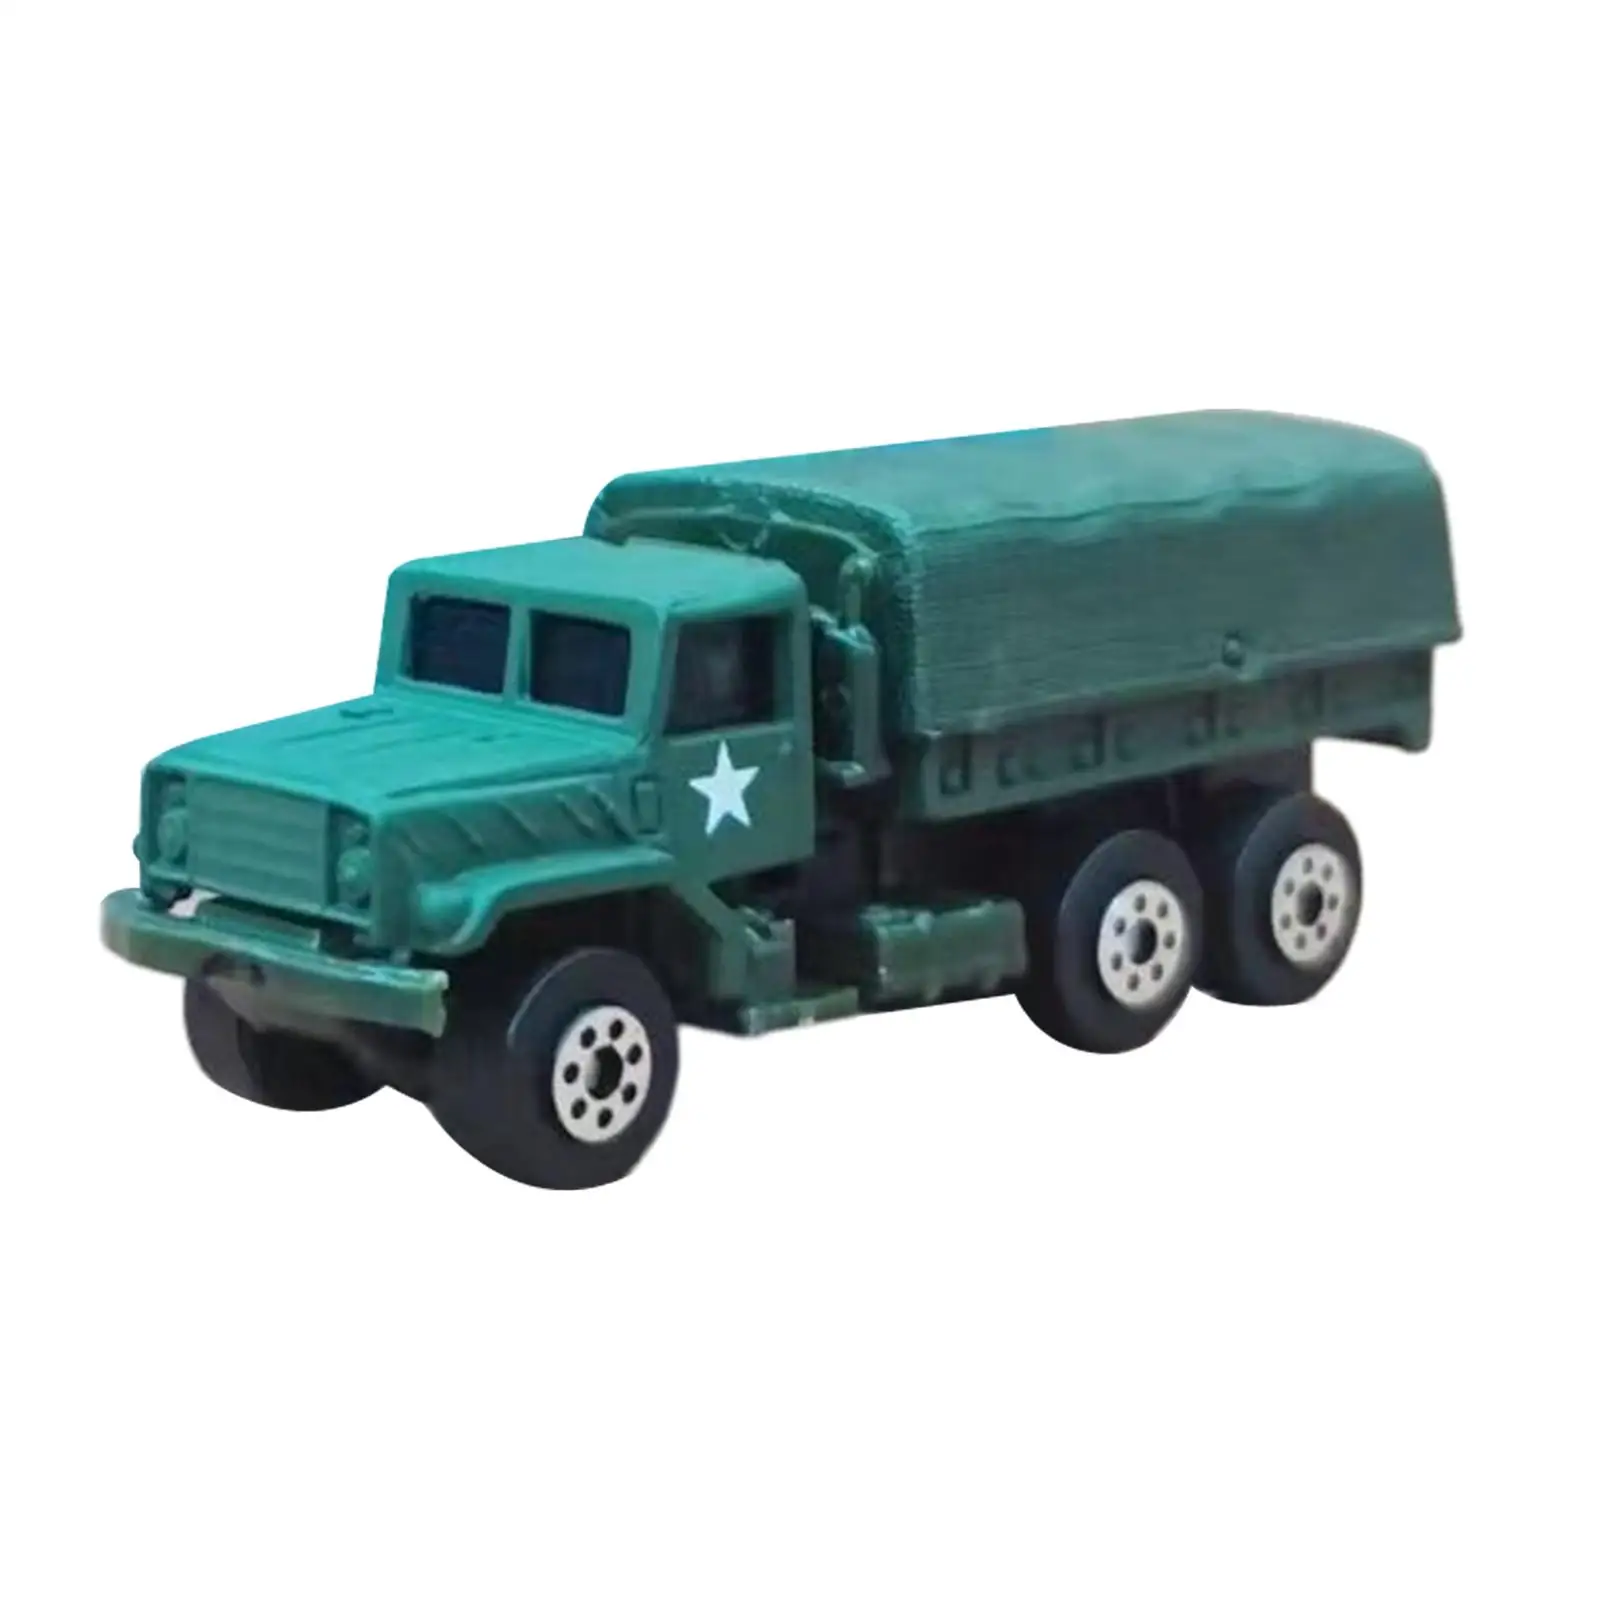 1:64 Cargo Truck Model Tabletop Decor Bedroom Cafe Decoration Collectables for Friends Teens Boys Kids Birthday Gifts